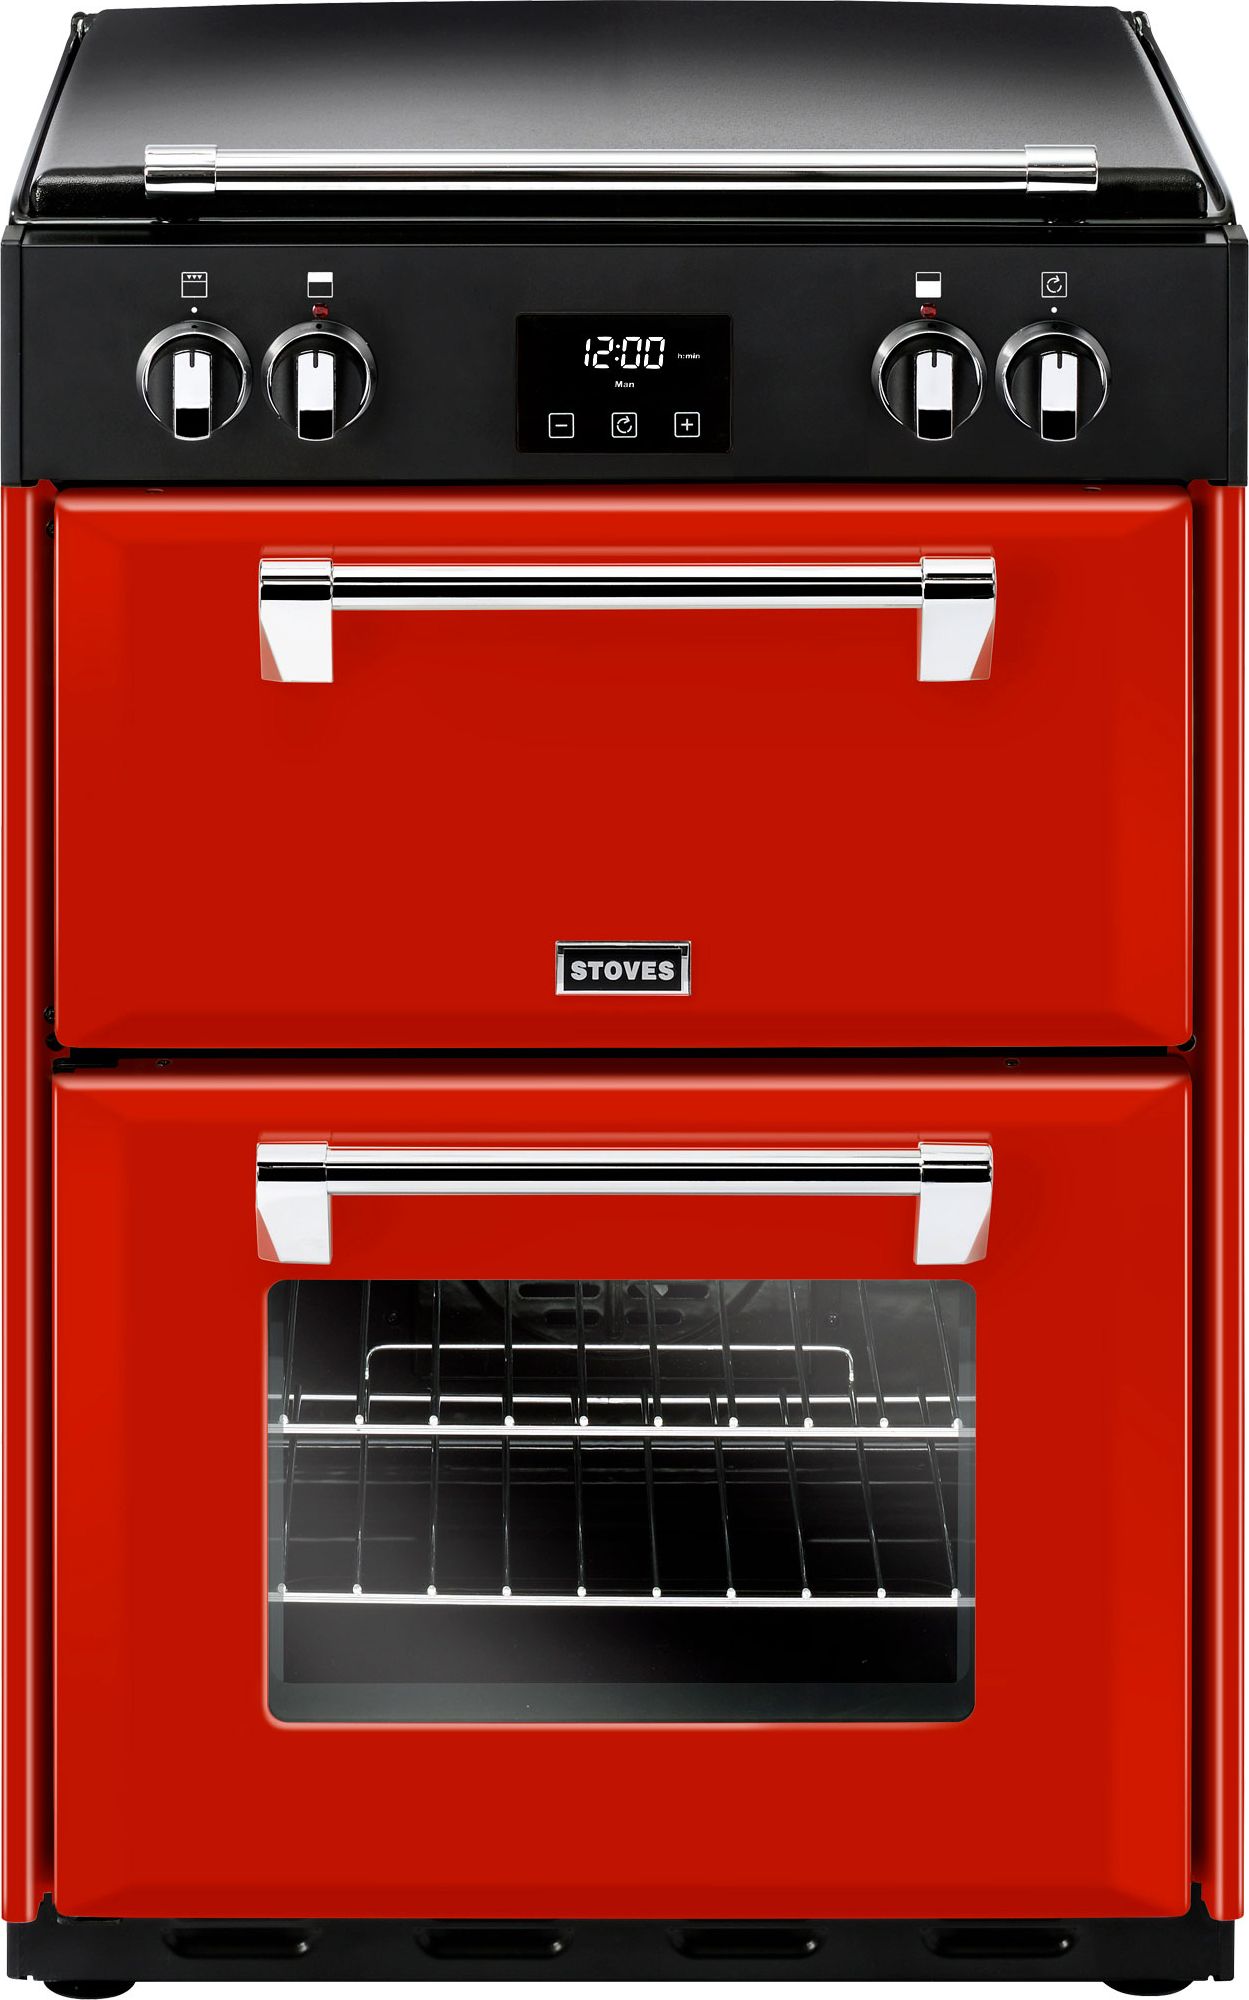 Stoves Richmond600Ei 60cm Electric Cooker with Induction Hob - Hot Jalapeno - A/A Rated, Red